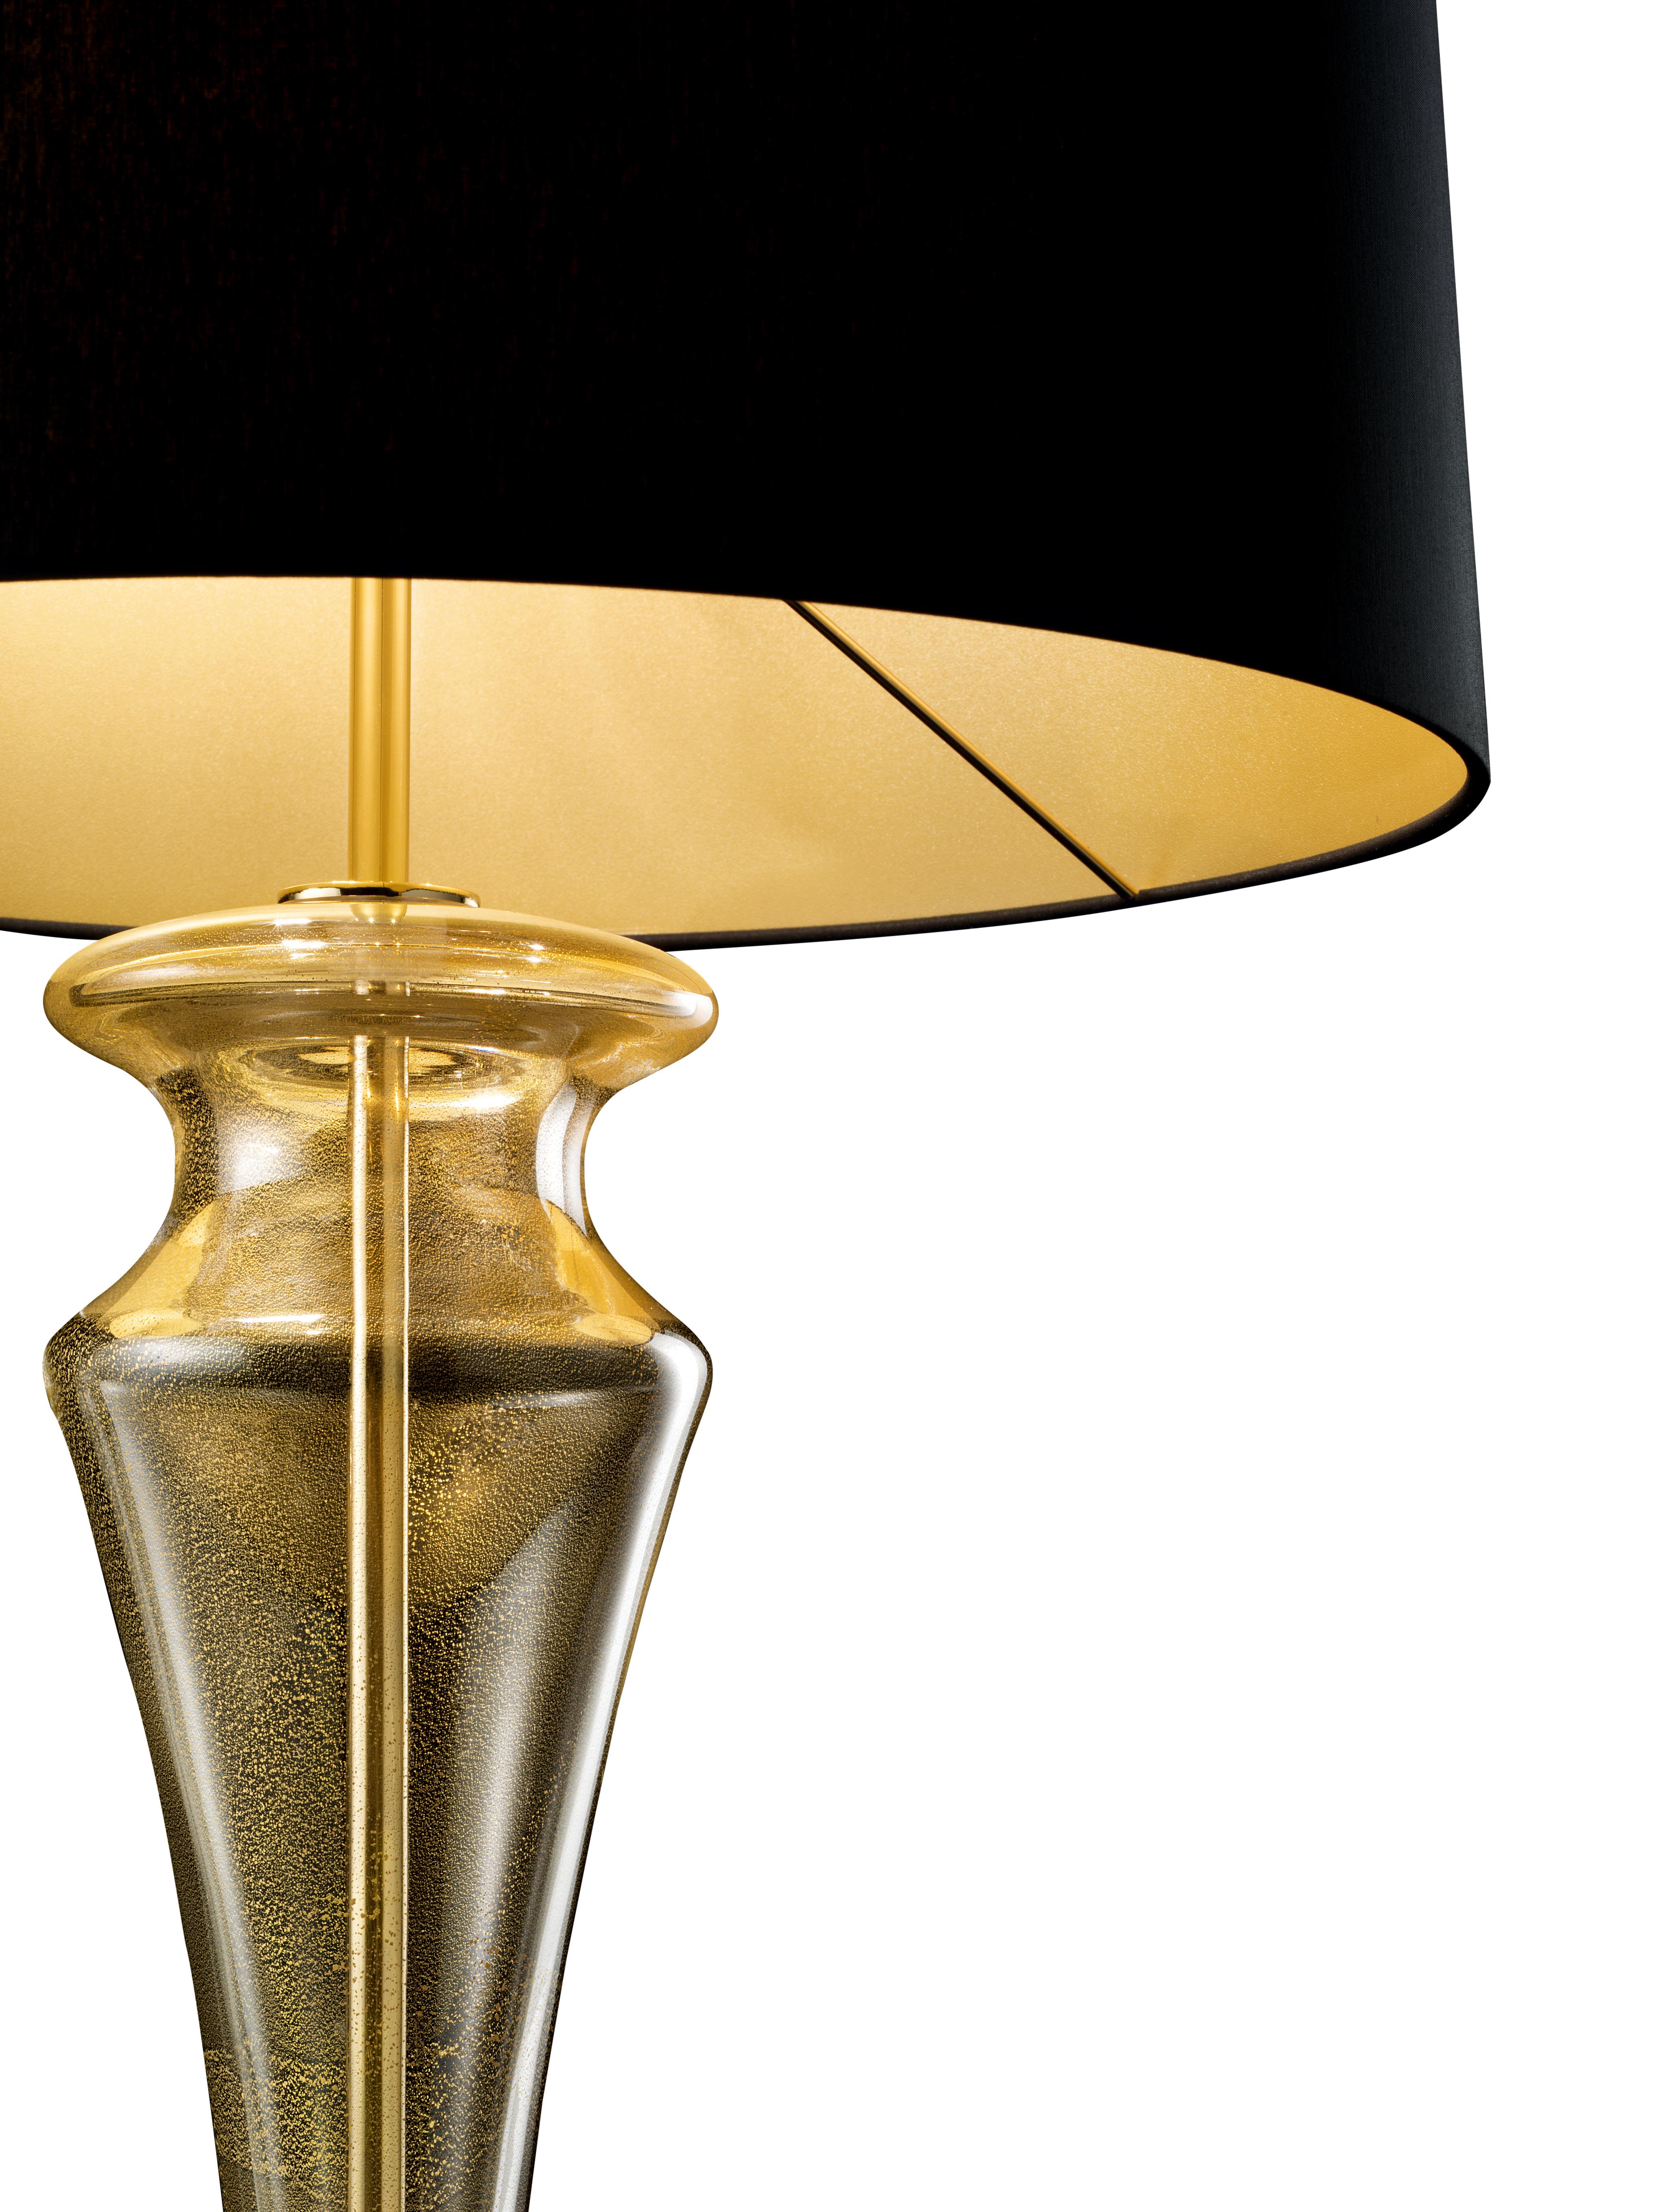 Gold (Gold_OO) Saint Germain 7067 Table Lamp in Glass with Black Shade, by Giorgia Brusemini 2